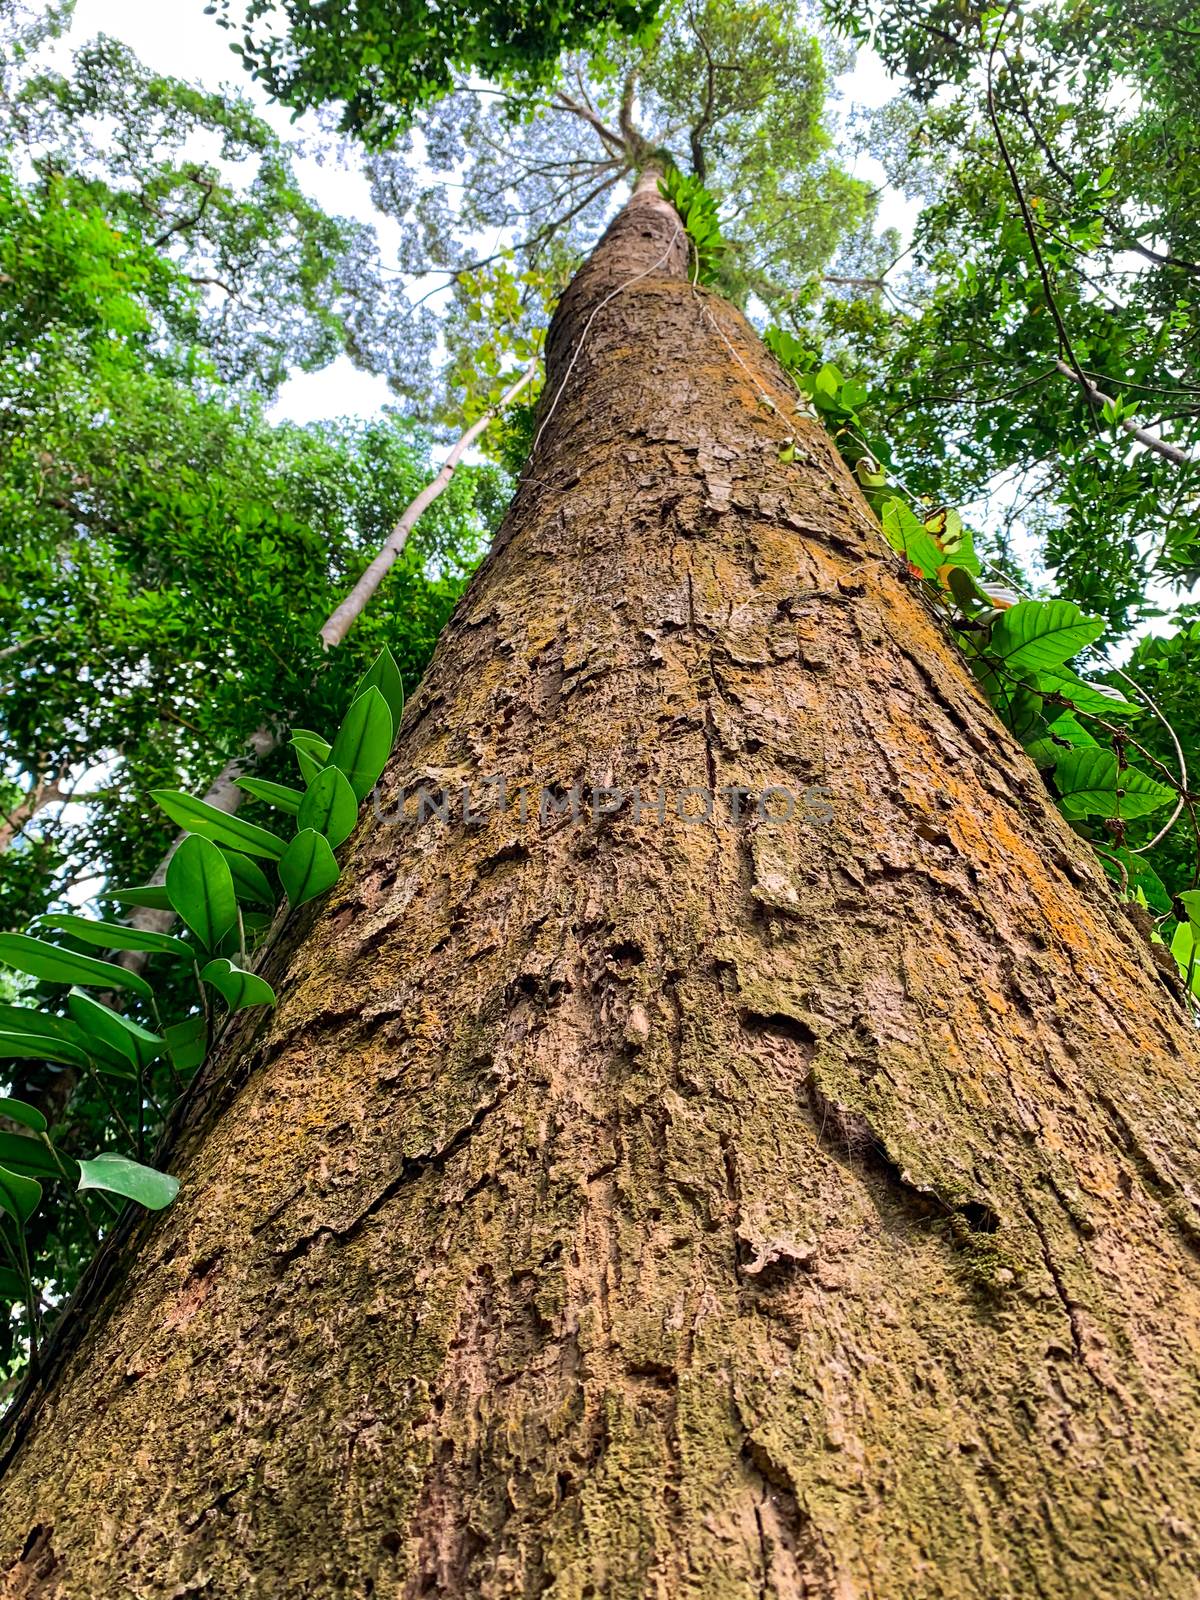 Bottom view of tall tree in tropical forest. Bottom view backgro by Fahroni